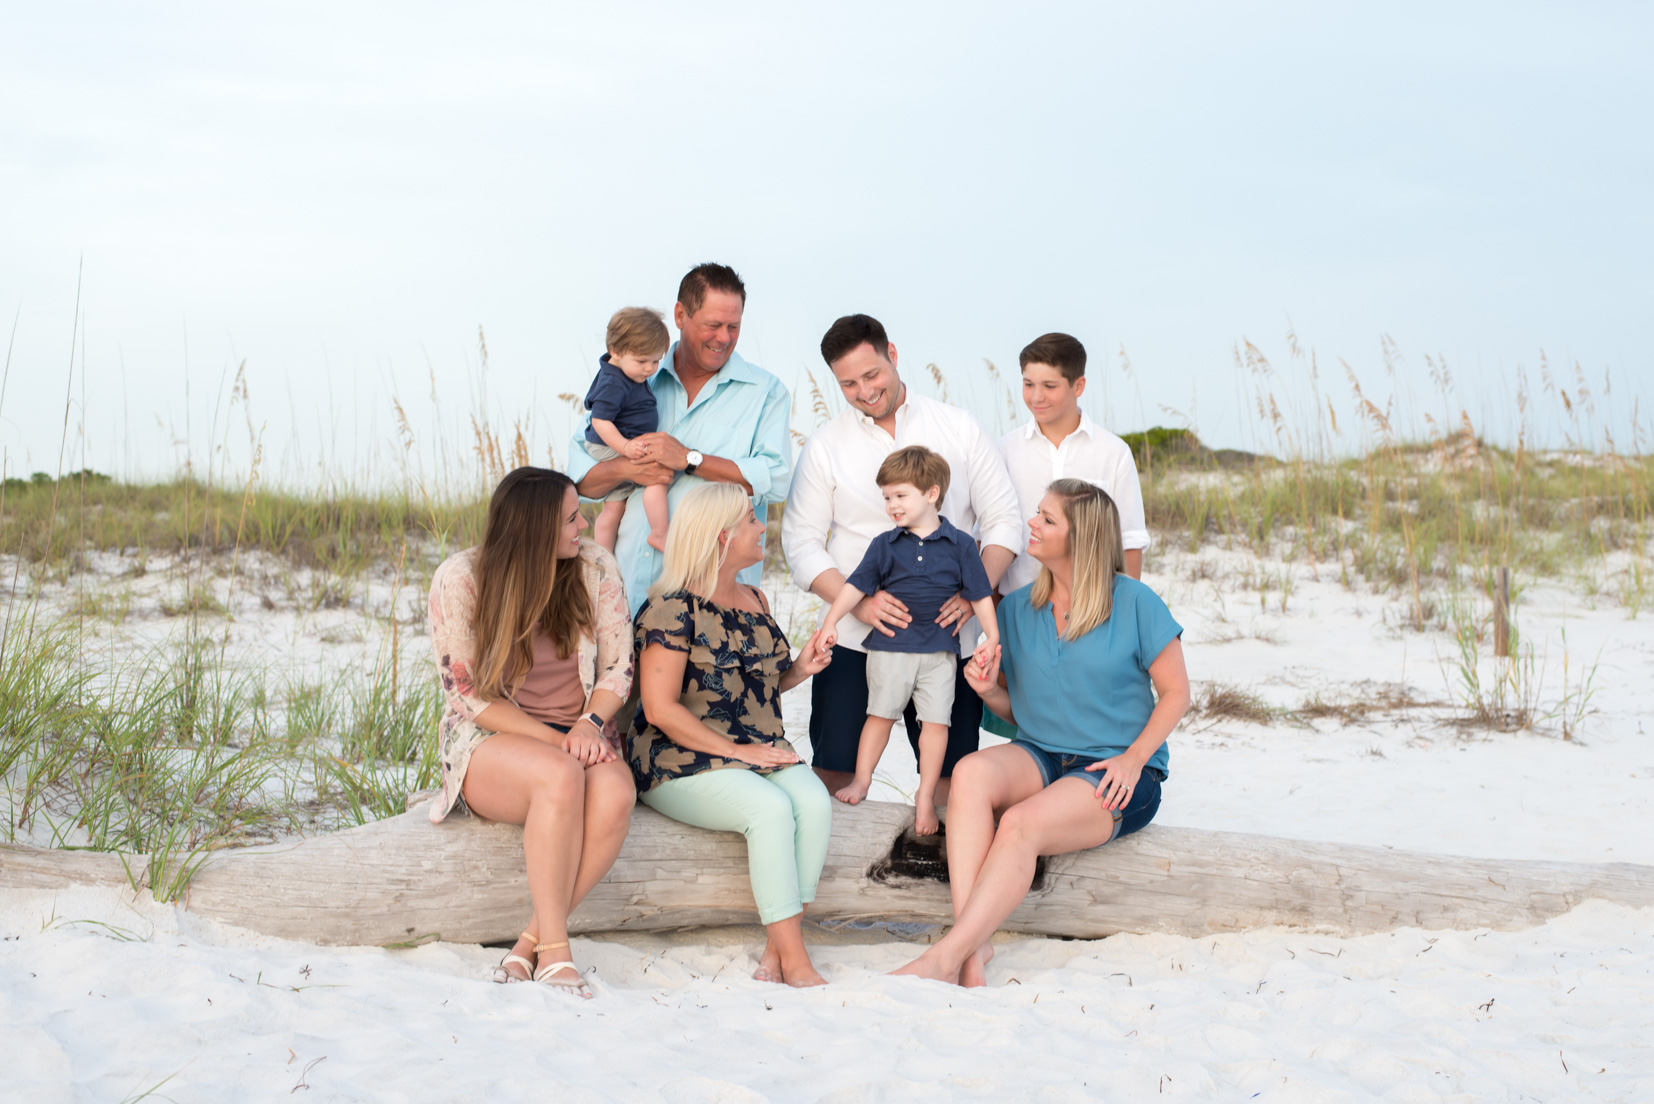 DSC_3366.jpg - Panama City beach family portrait photo session just before sunset by Holly Naughton Photography